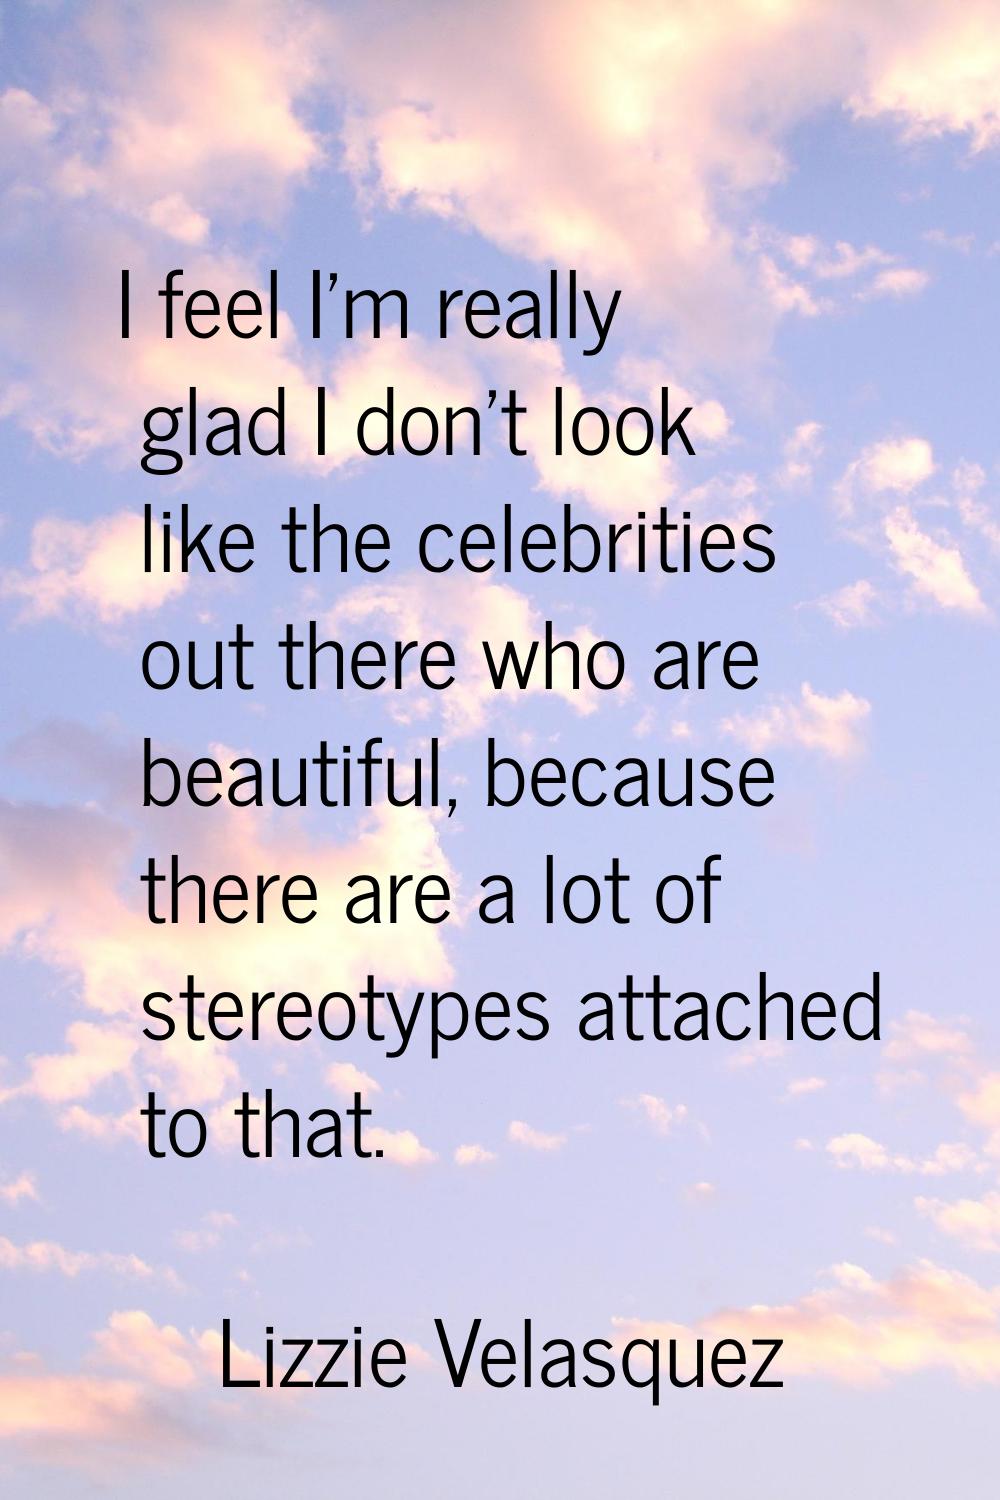 I feel I'm really glad I don't look like the celebrities out there who are beautiful, because there